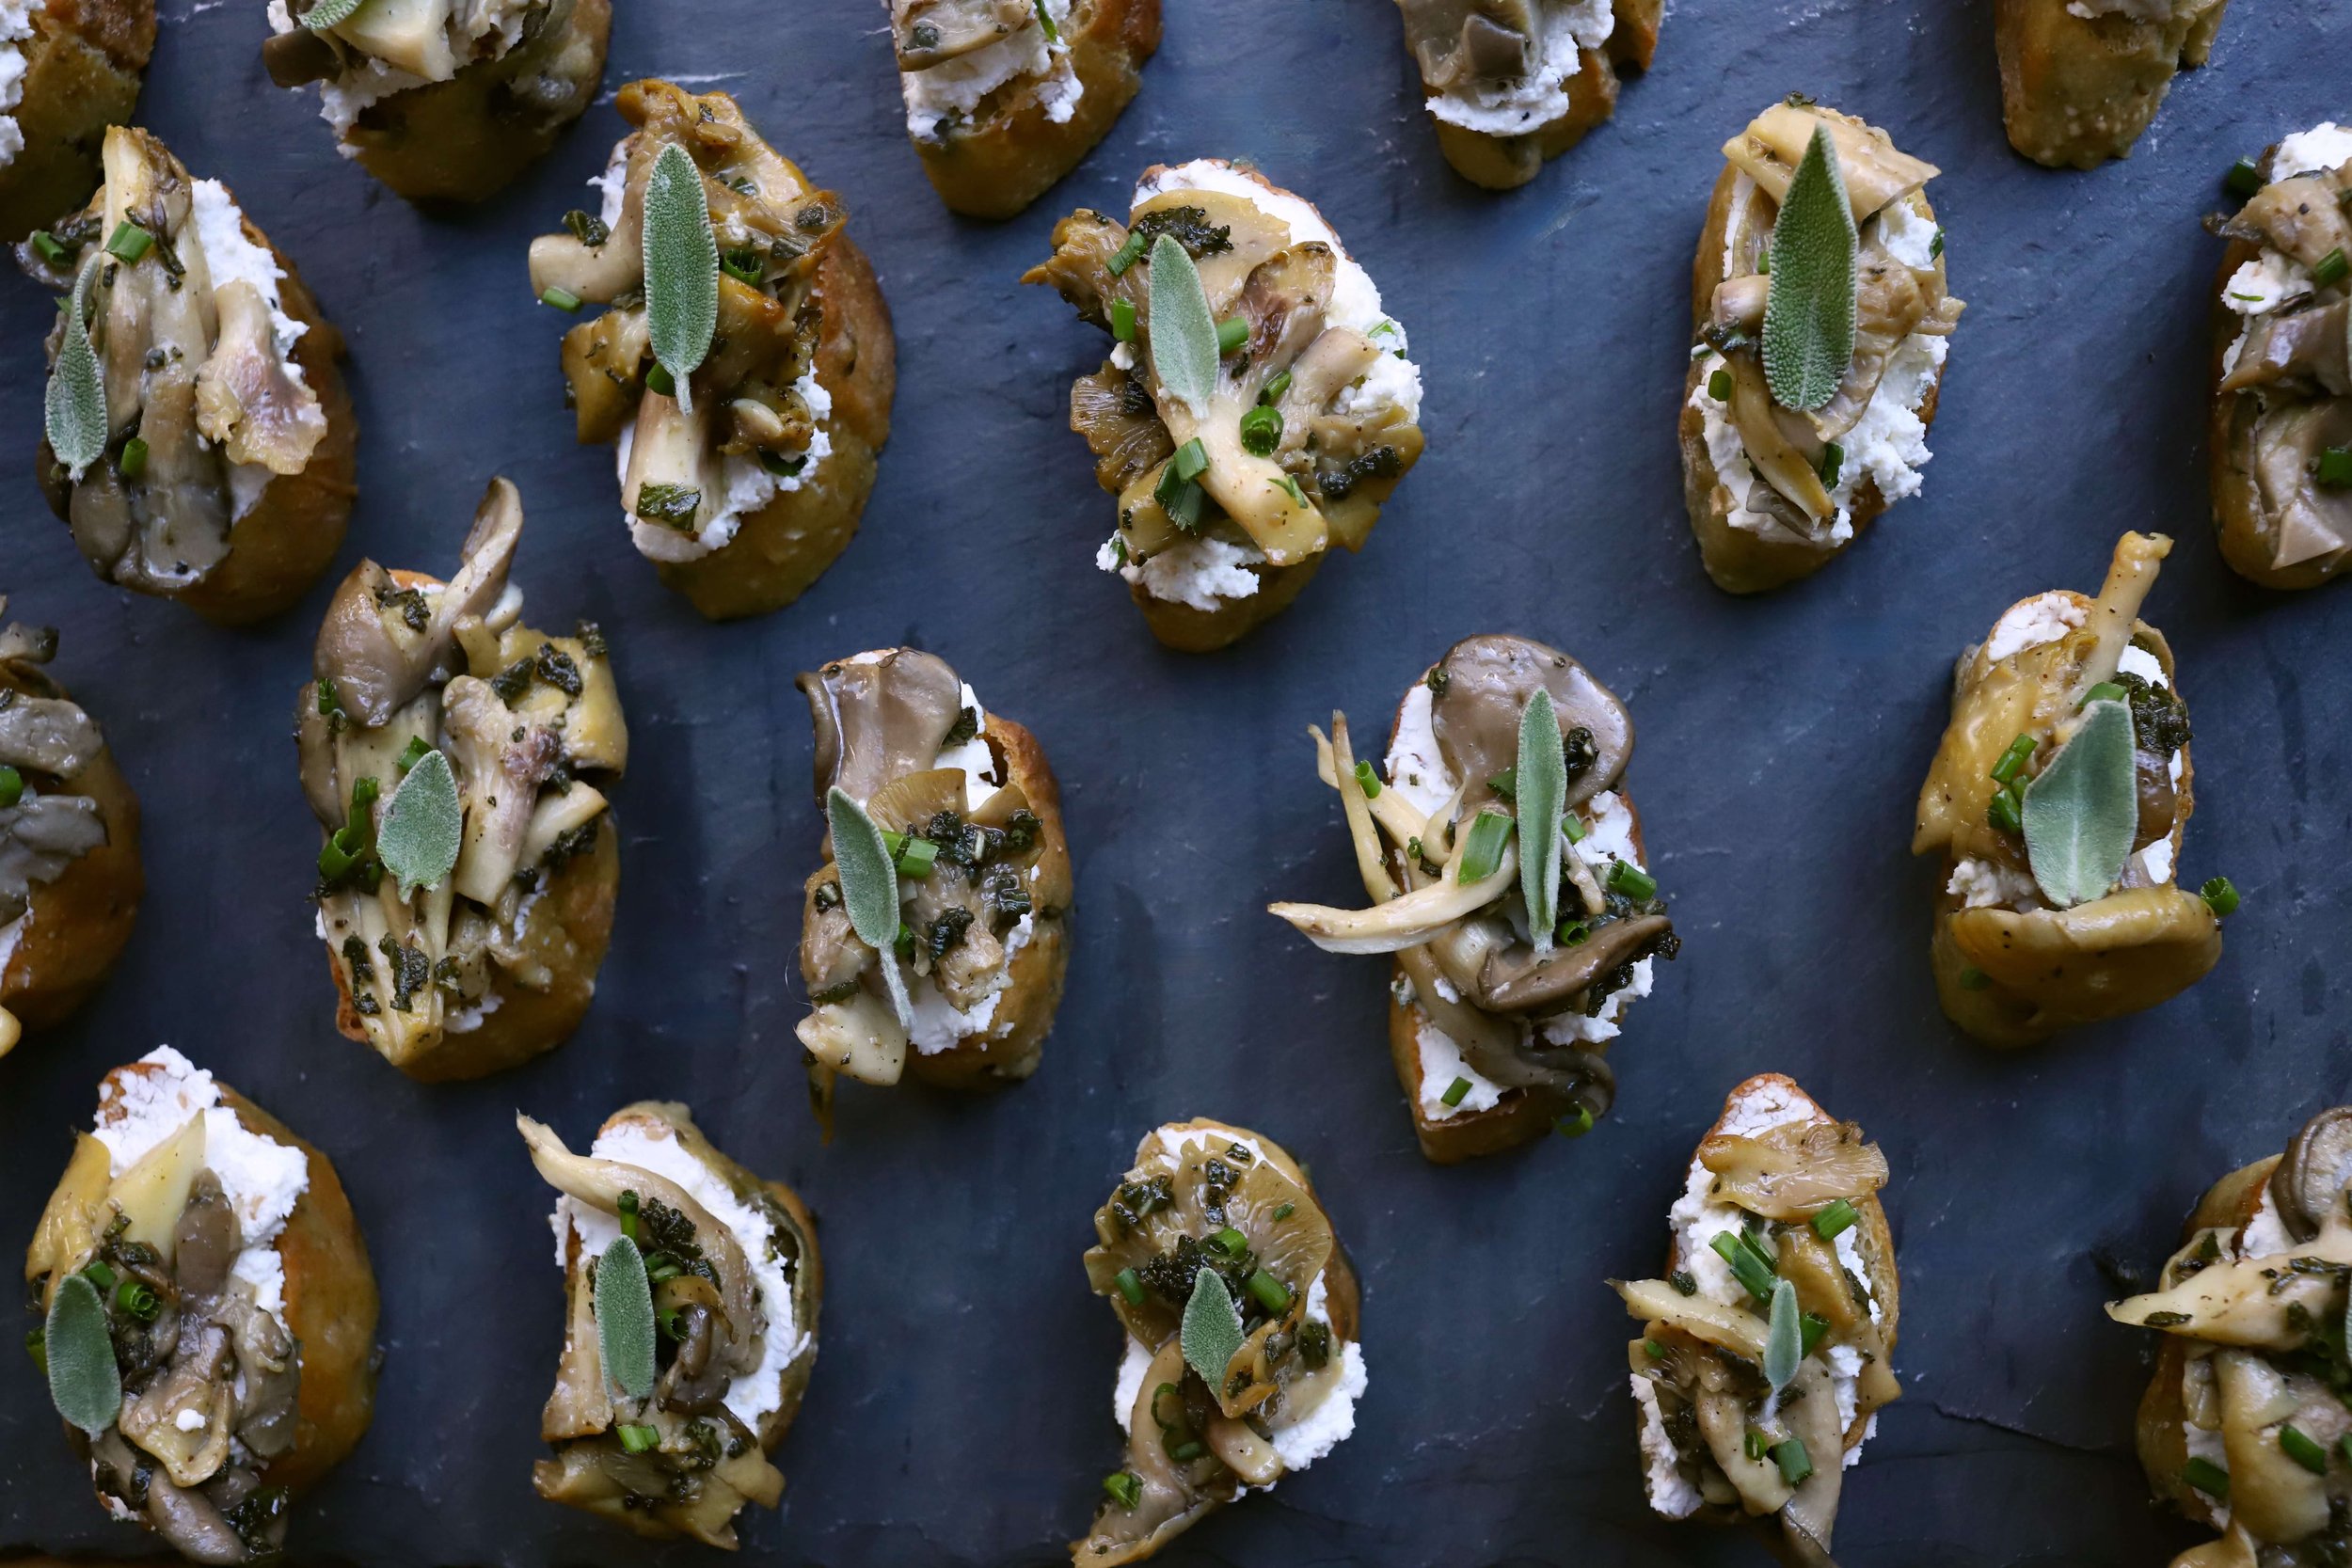 BROWN BUTTER SAGE OYSTER MUSHROOM AND GOAT CHEESE CROSTINI